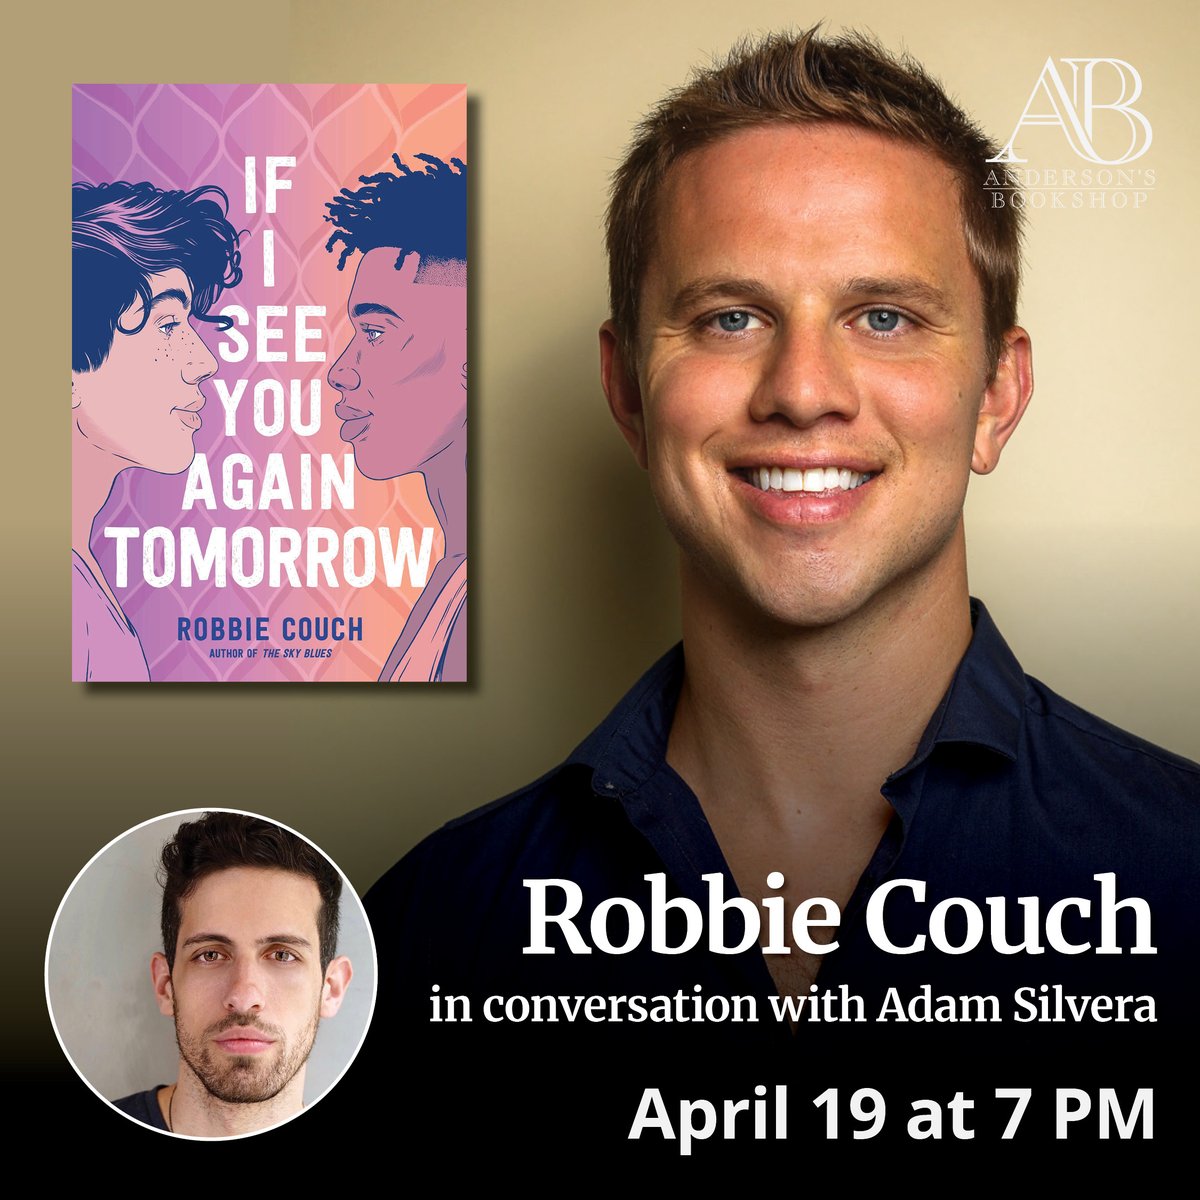 4/19: A dream team of in-person event w/ Robbie Couch @robbie_couch for, If I See You Again Tomorrow. In convo w/ often-banned but never beaten bestseller Adam Silvera @AdamSilvera! Yes really! Both of them! In one room! Talk, Q&A, & photo/sign line. TIX: RobbieCouch23Andersons.eventcombo.com